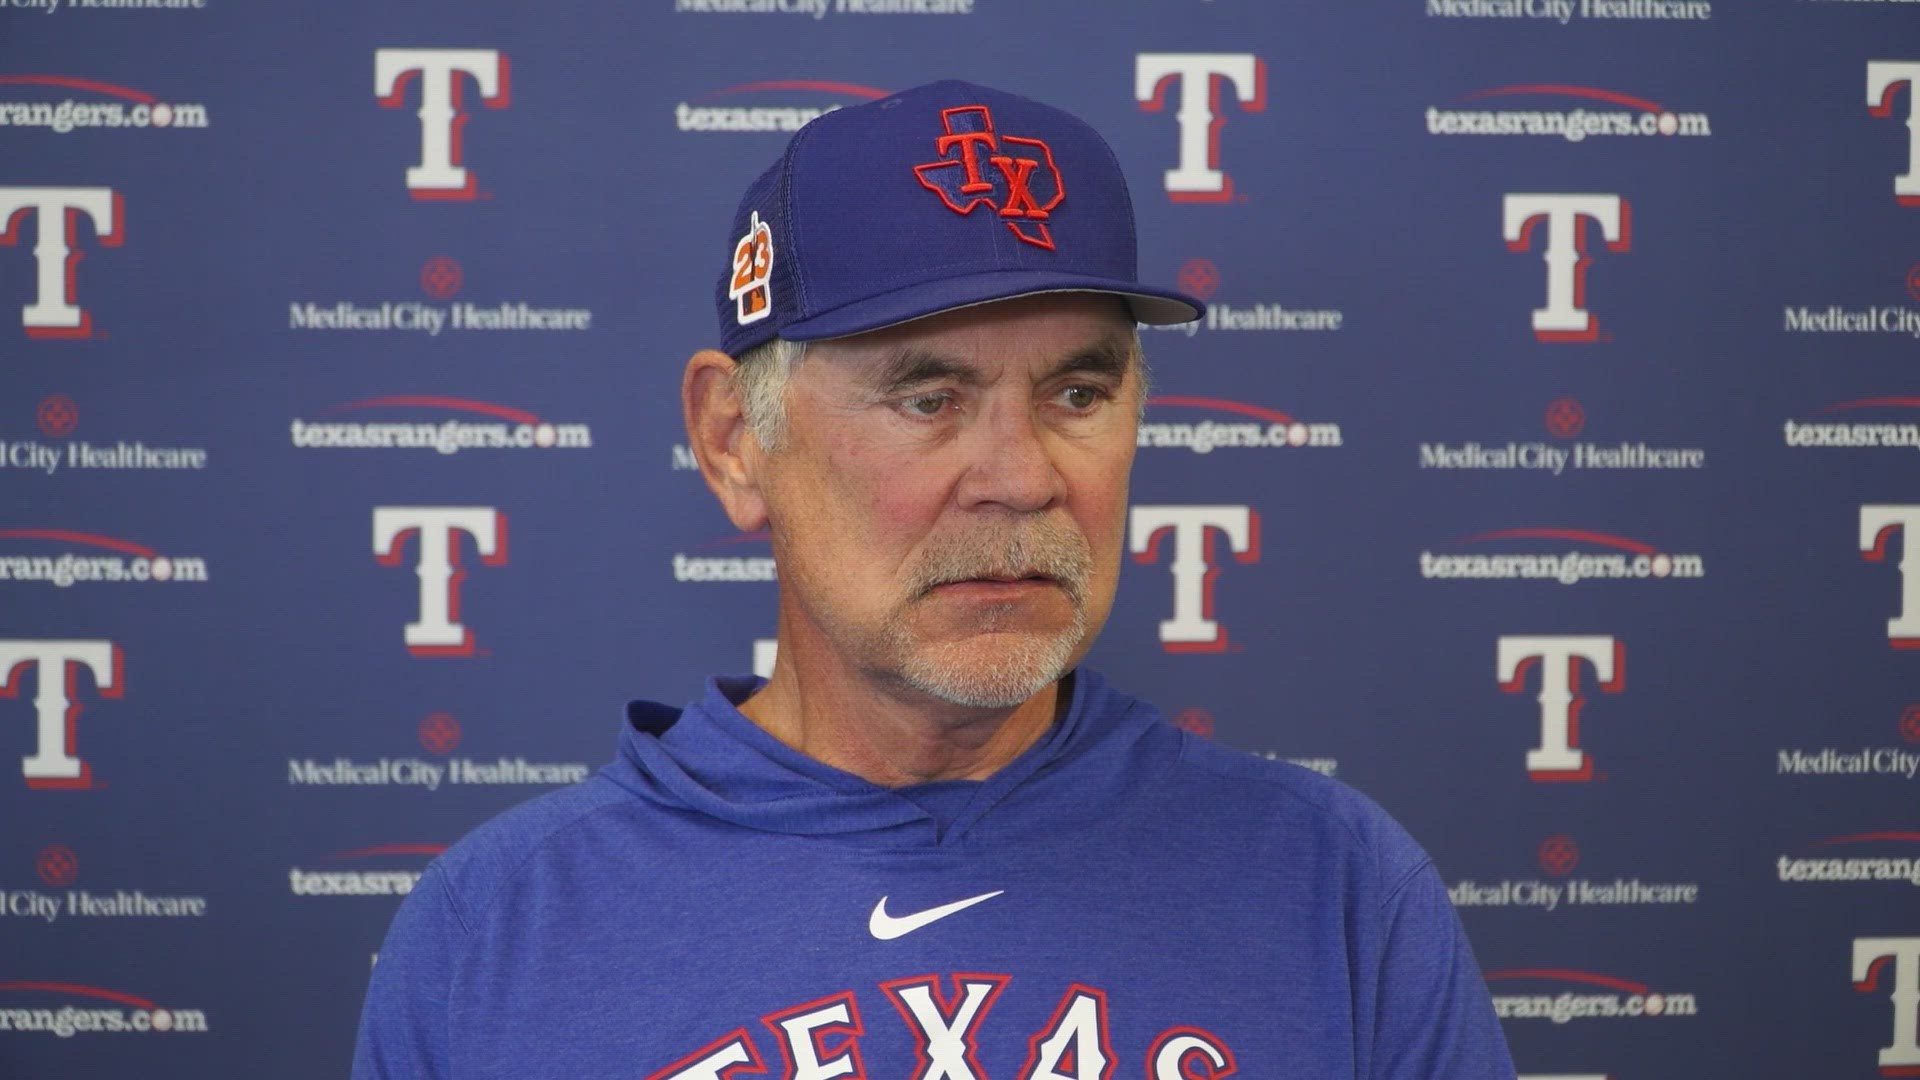 Texas Rangers manager Bruce Bochy gave a full update on spring training on Thursday.